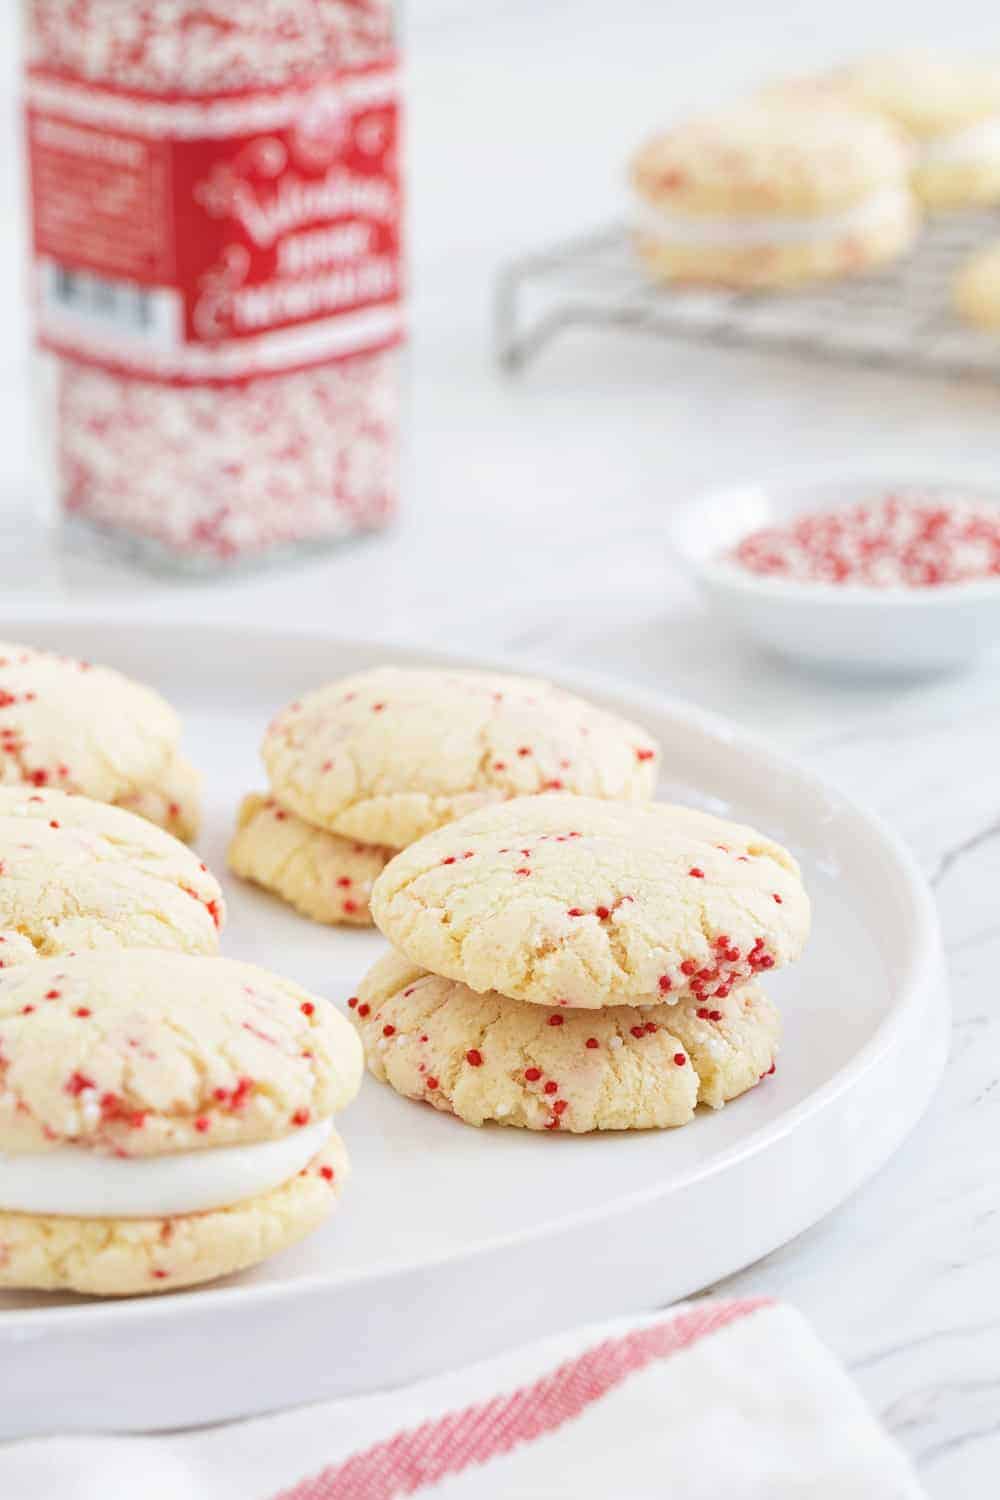 Easy Sugar Cookies come together in a snap! No chilling, rolling, or cookie cutters required! You'll LOVE these!